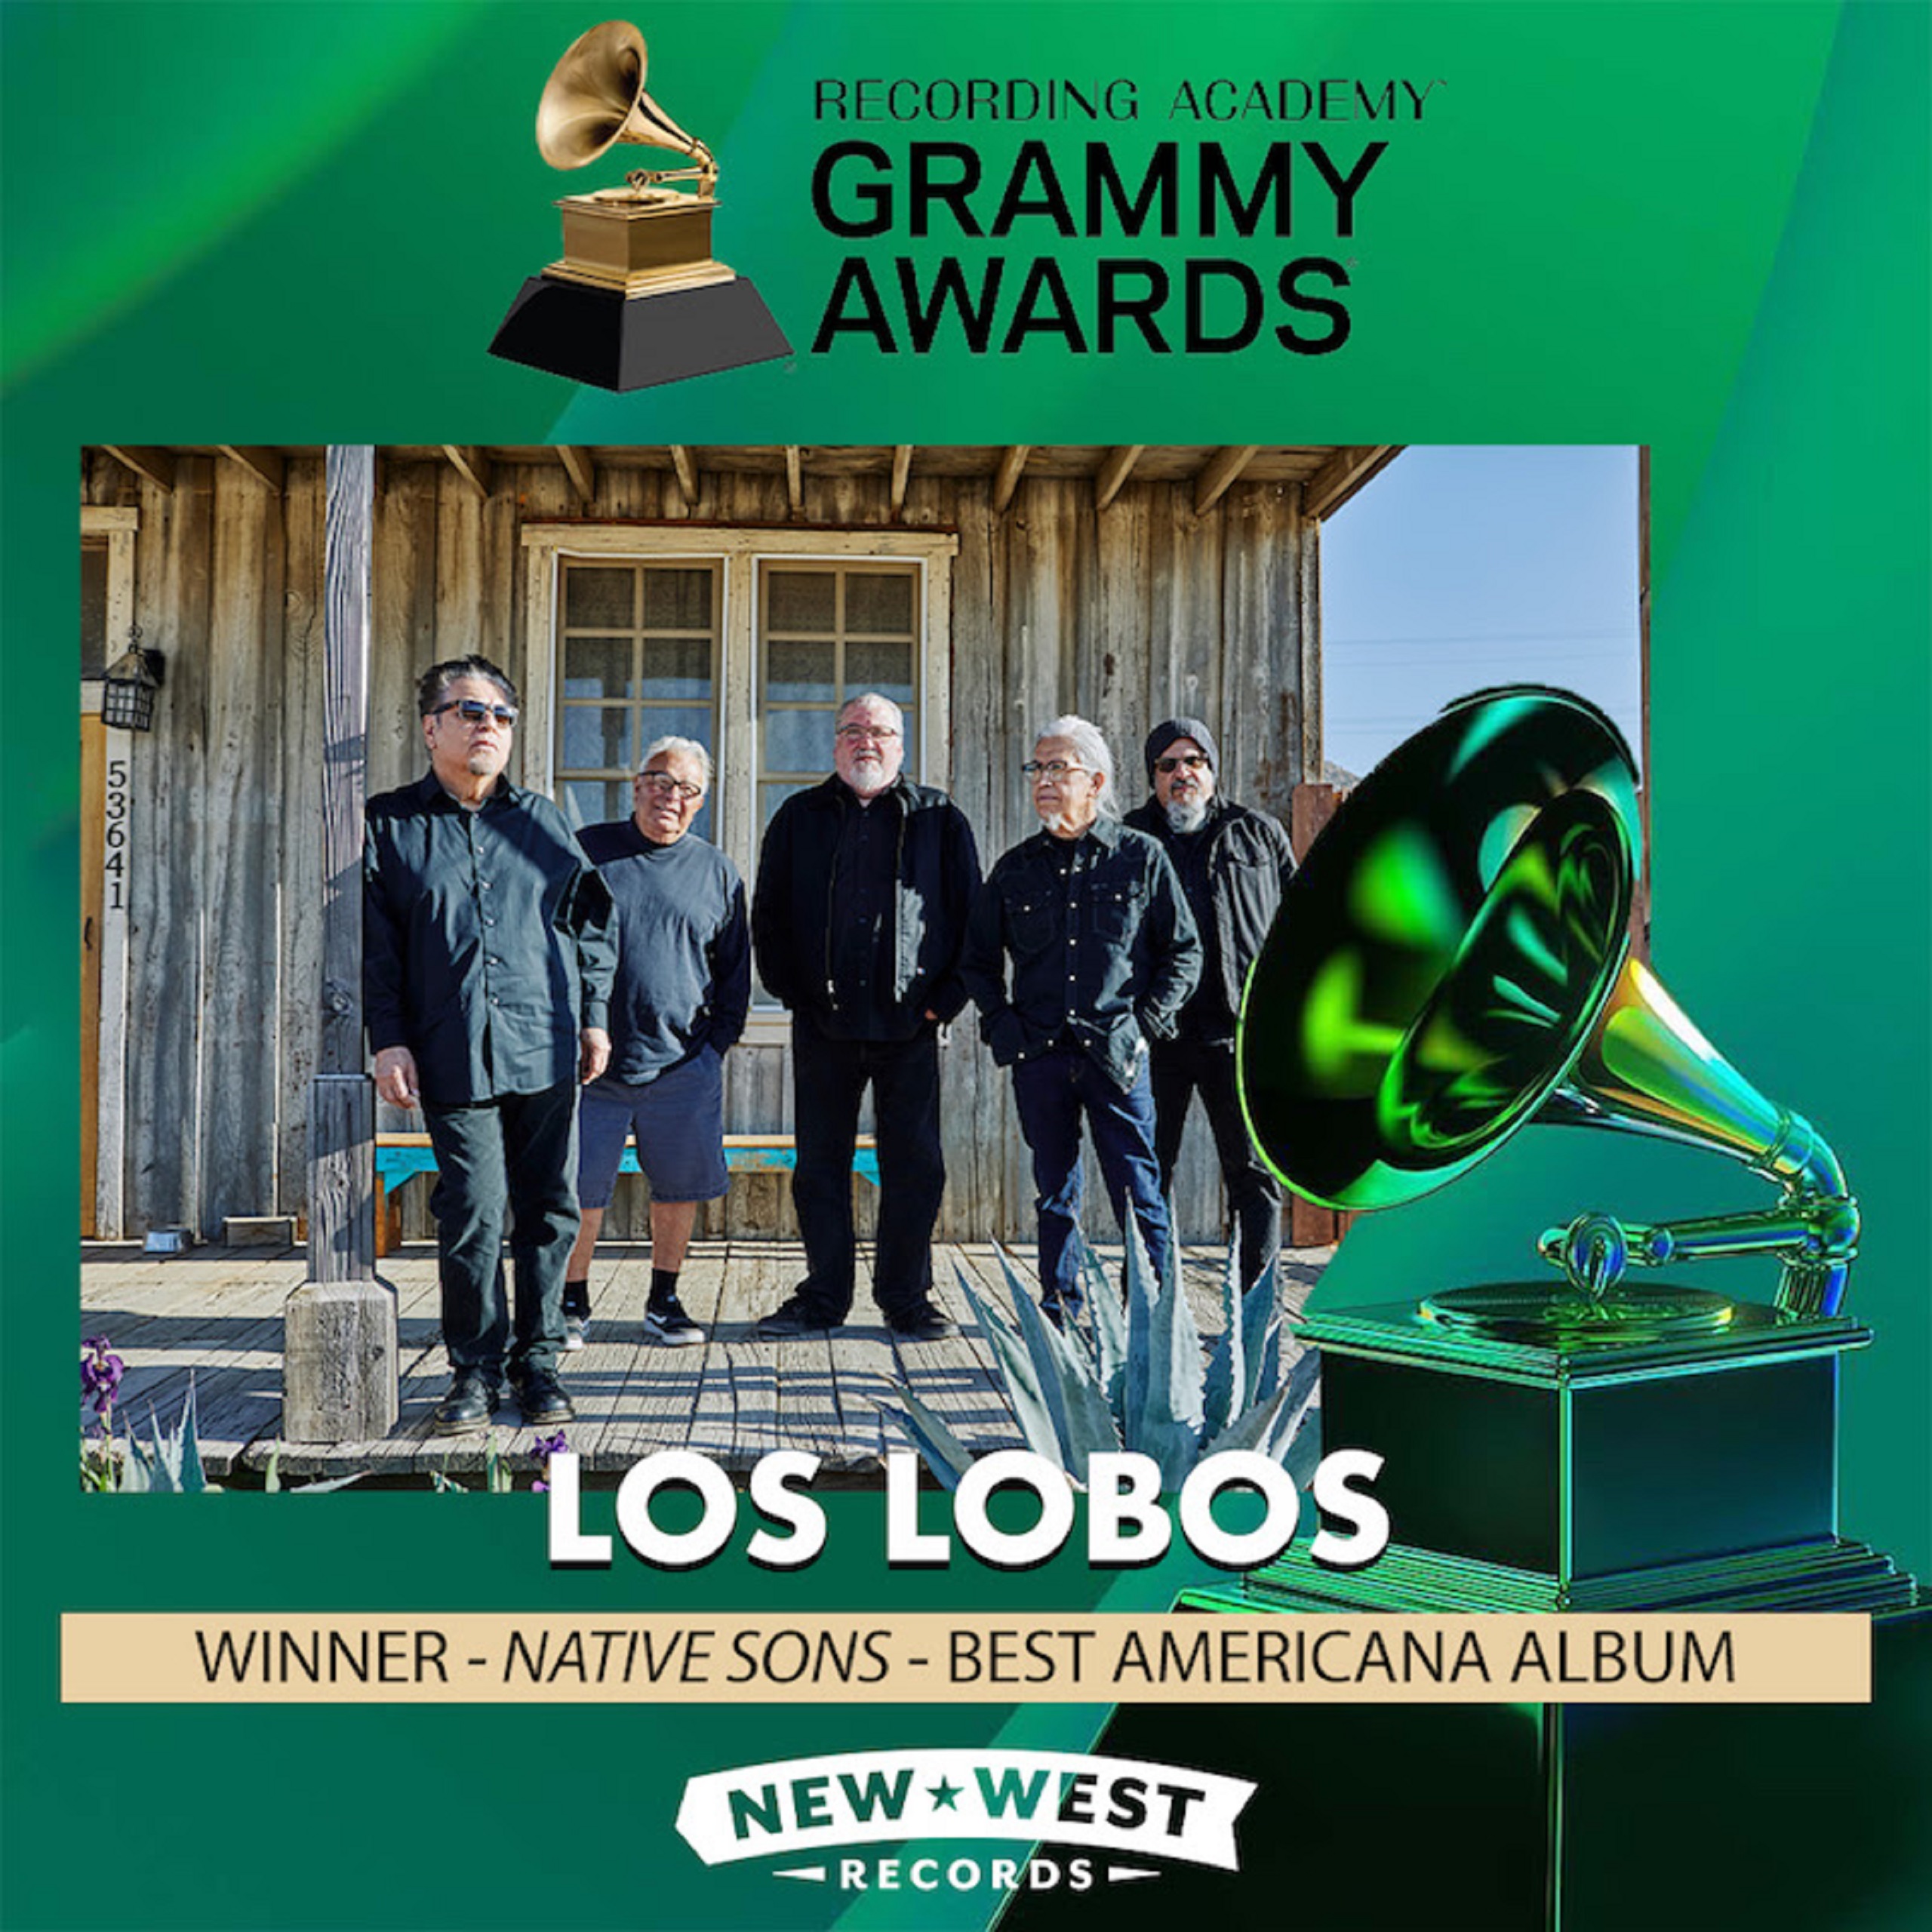 Los Lobos Wins "Best Americana Album" For "Native Sons" At 64th Annual Grammy Awards